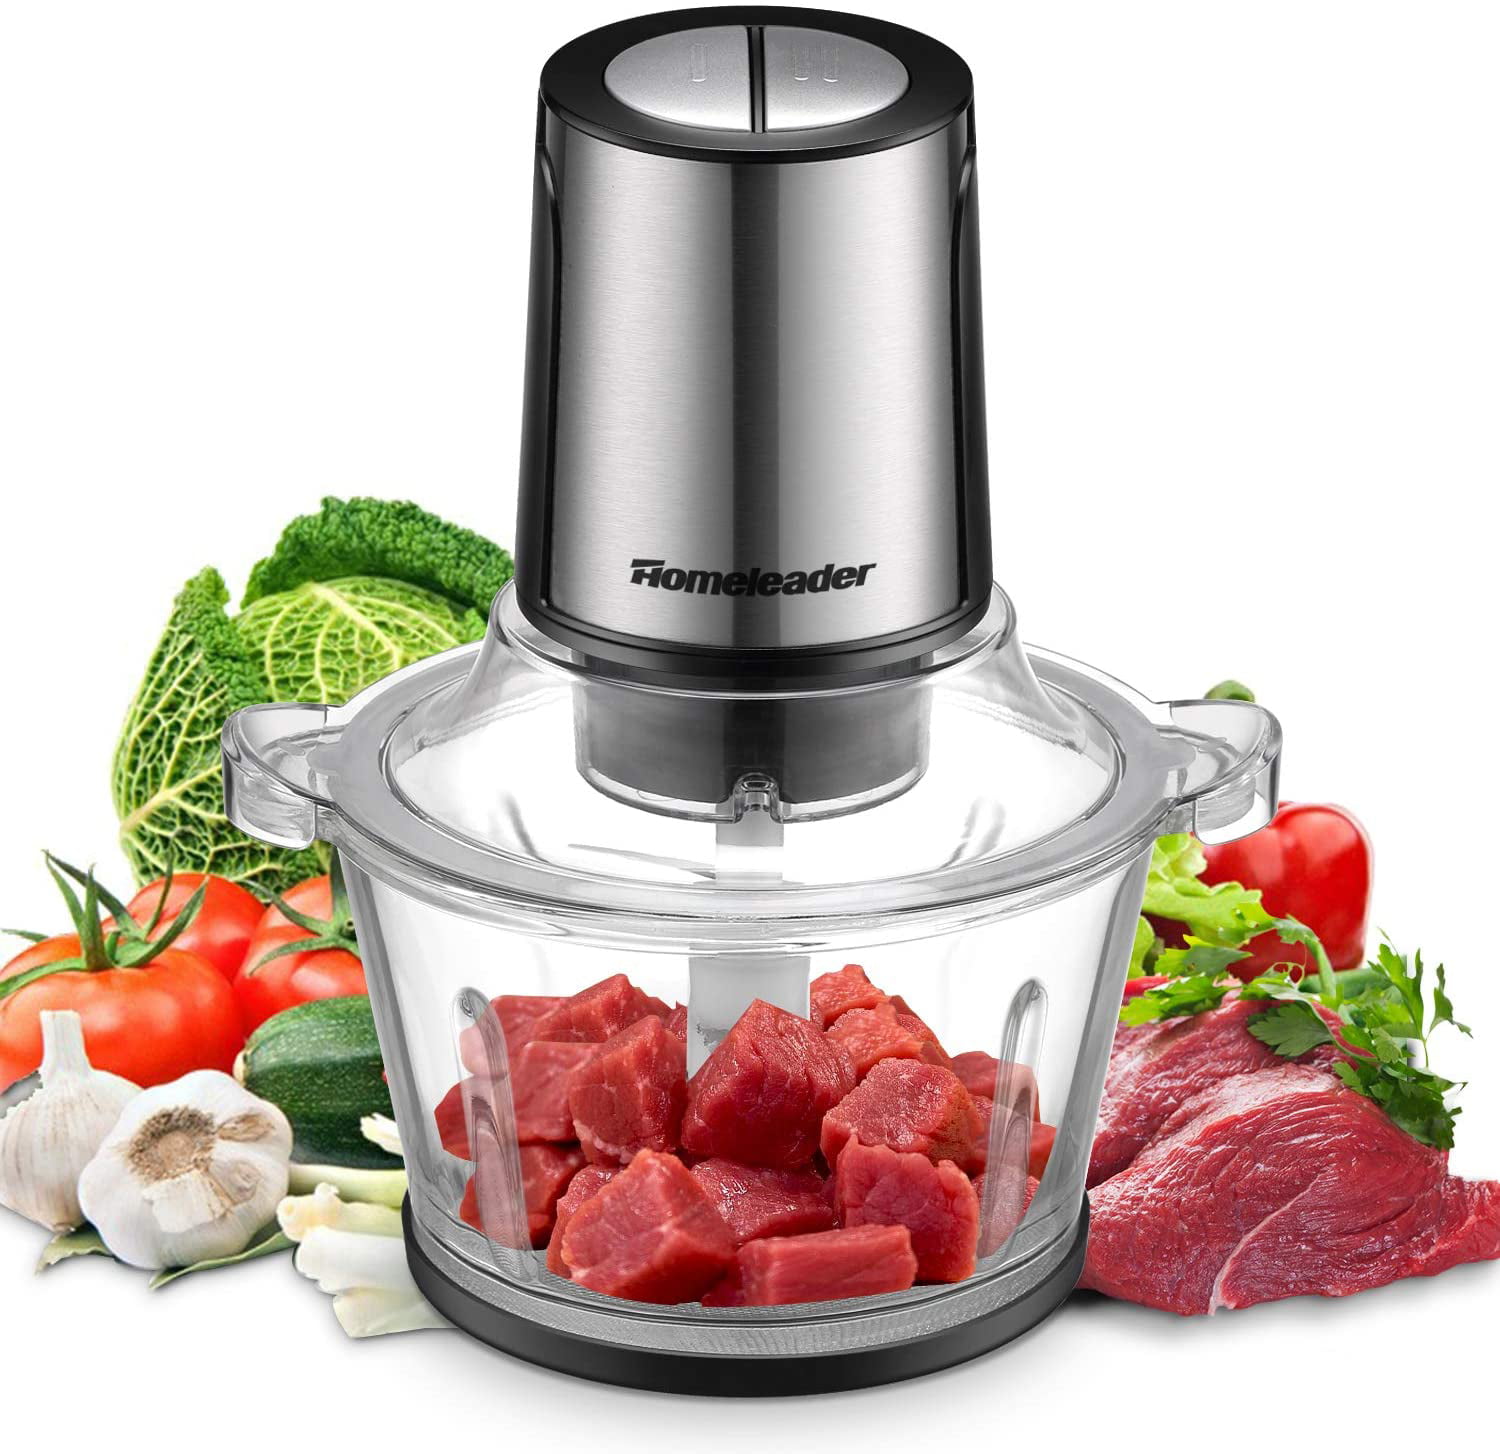 Costway Food Processor & Blender, 500W Professional Food Chopper with 3 Blades, 3-Speed Adjustment, Dual Safety Lock Design, Large Capacity Bowls, for